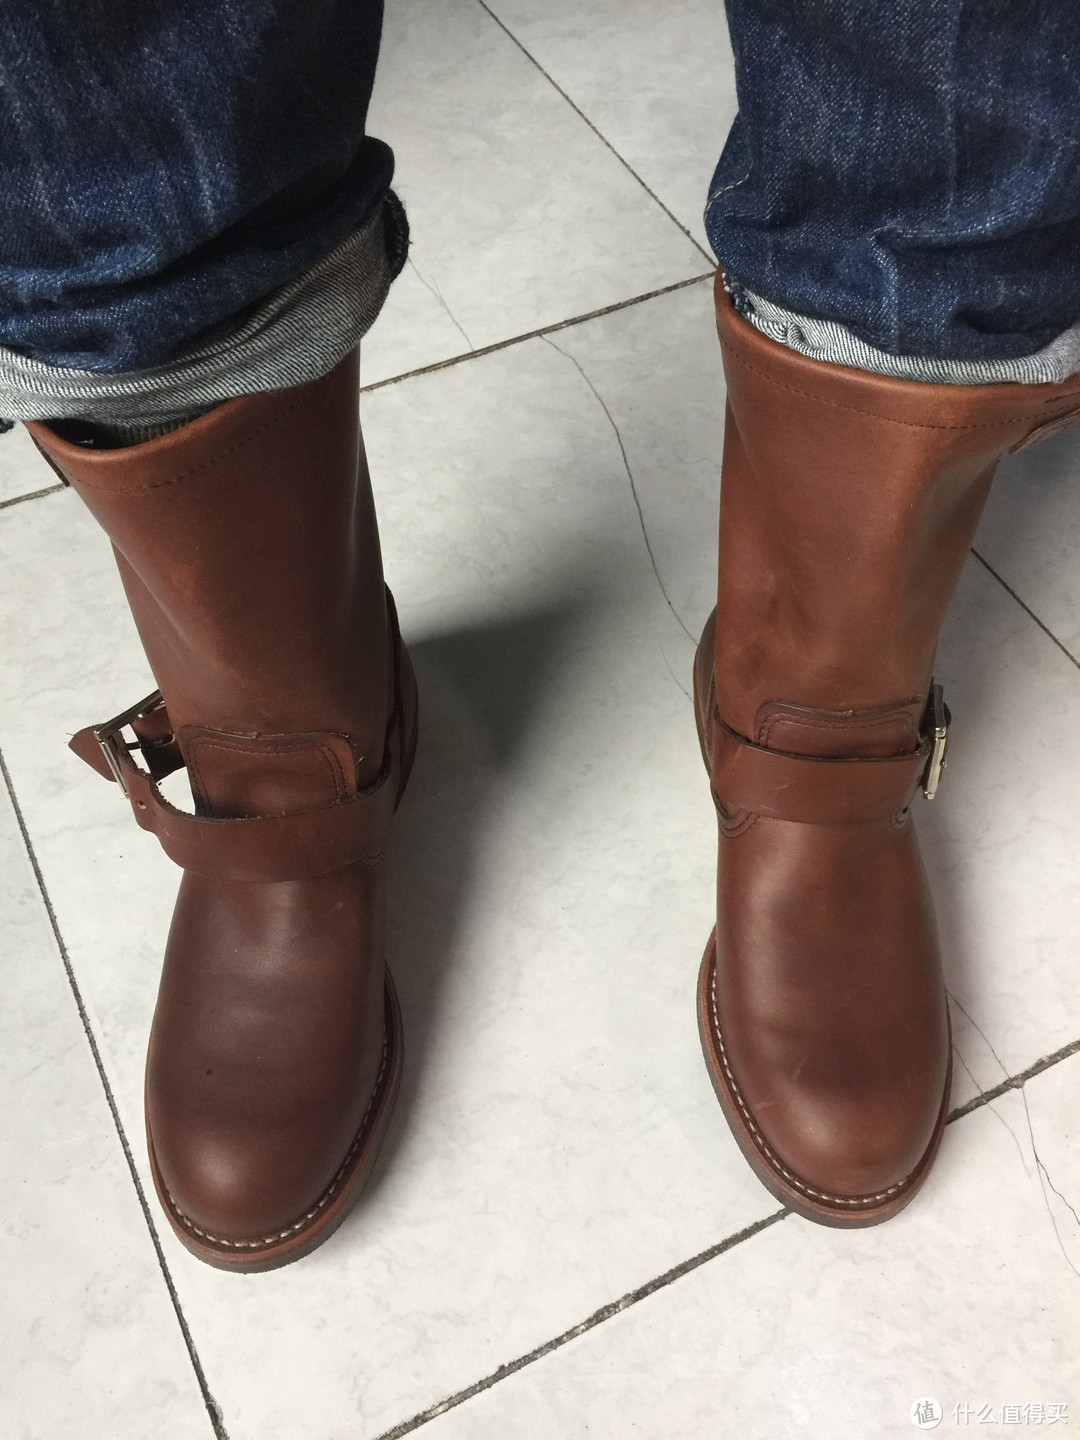 RED WING 红翼11寸2991工程师靴 Red Wing 11" Heritage Engineer Cork 开箱